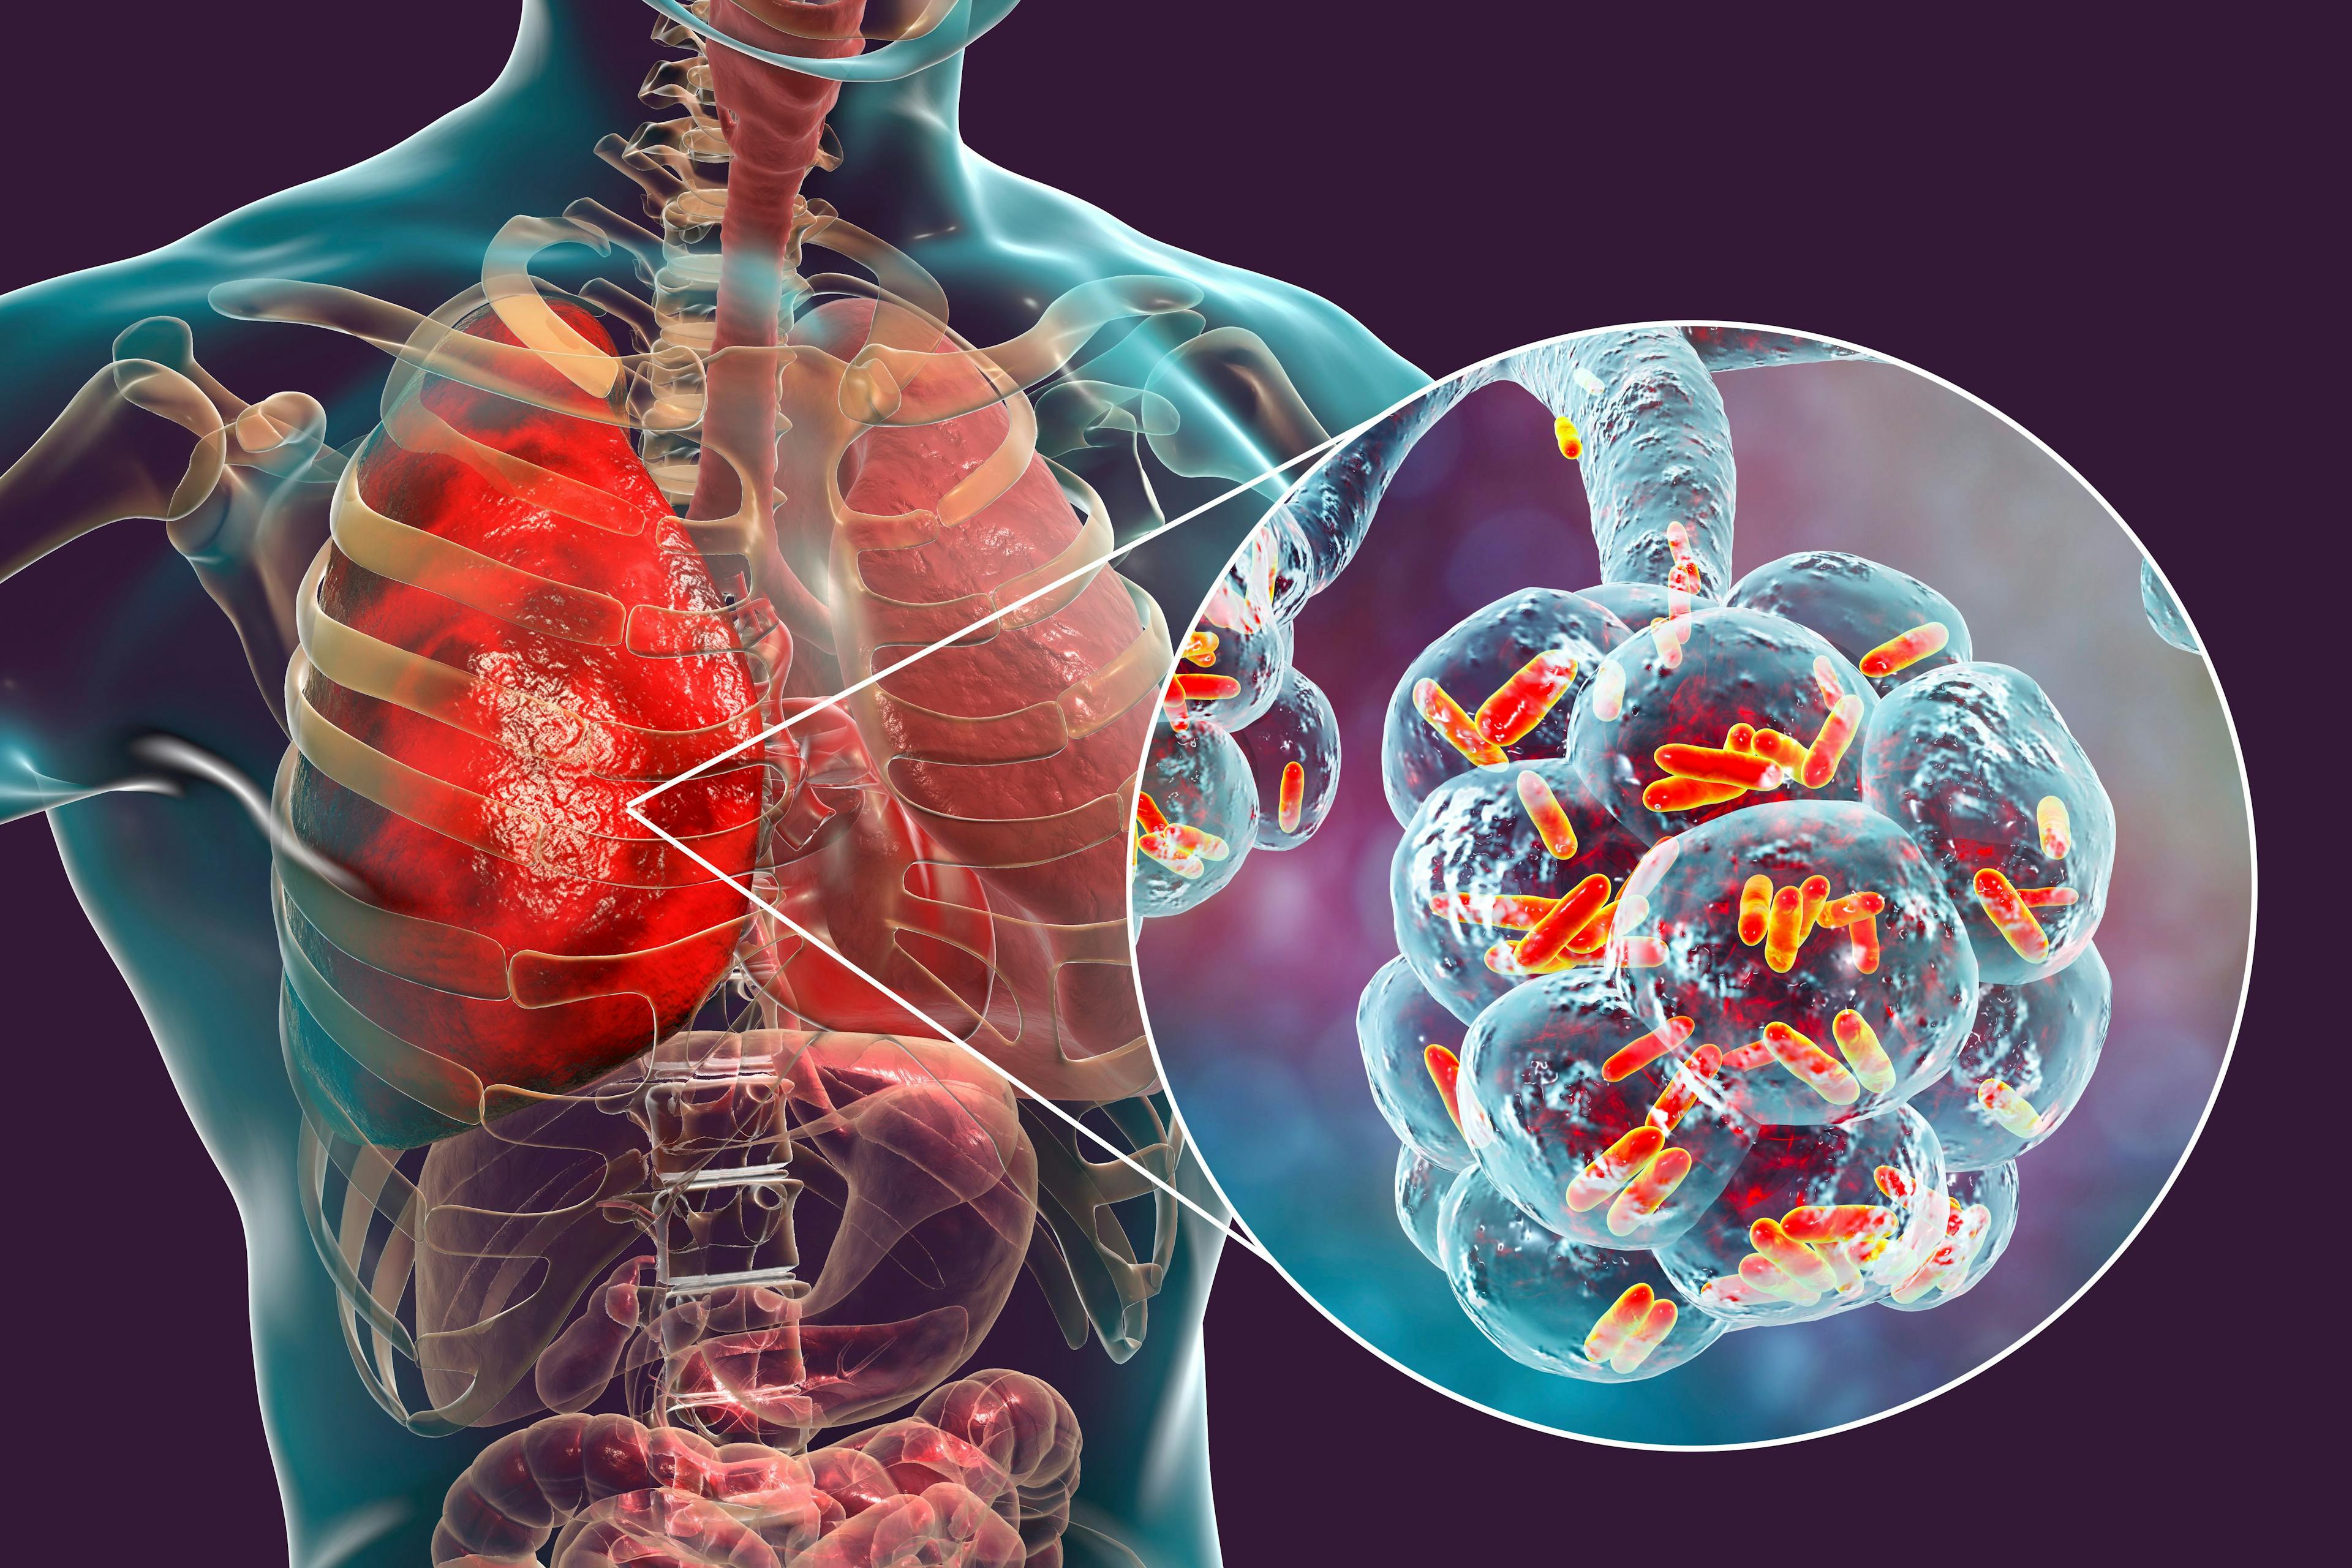 Bacterial pneumonia, medical concept. 3D illustration showing rod-shaped bacteria inside alveoli of the lung | Image Credit: Dr_Microbe - atock.adobe.com